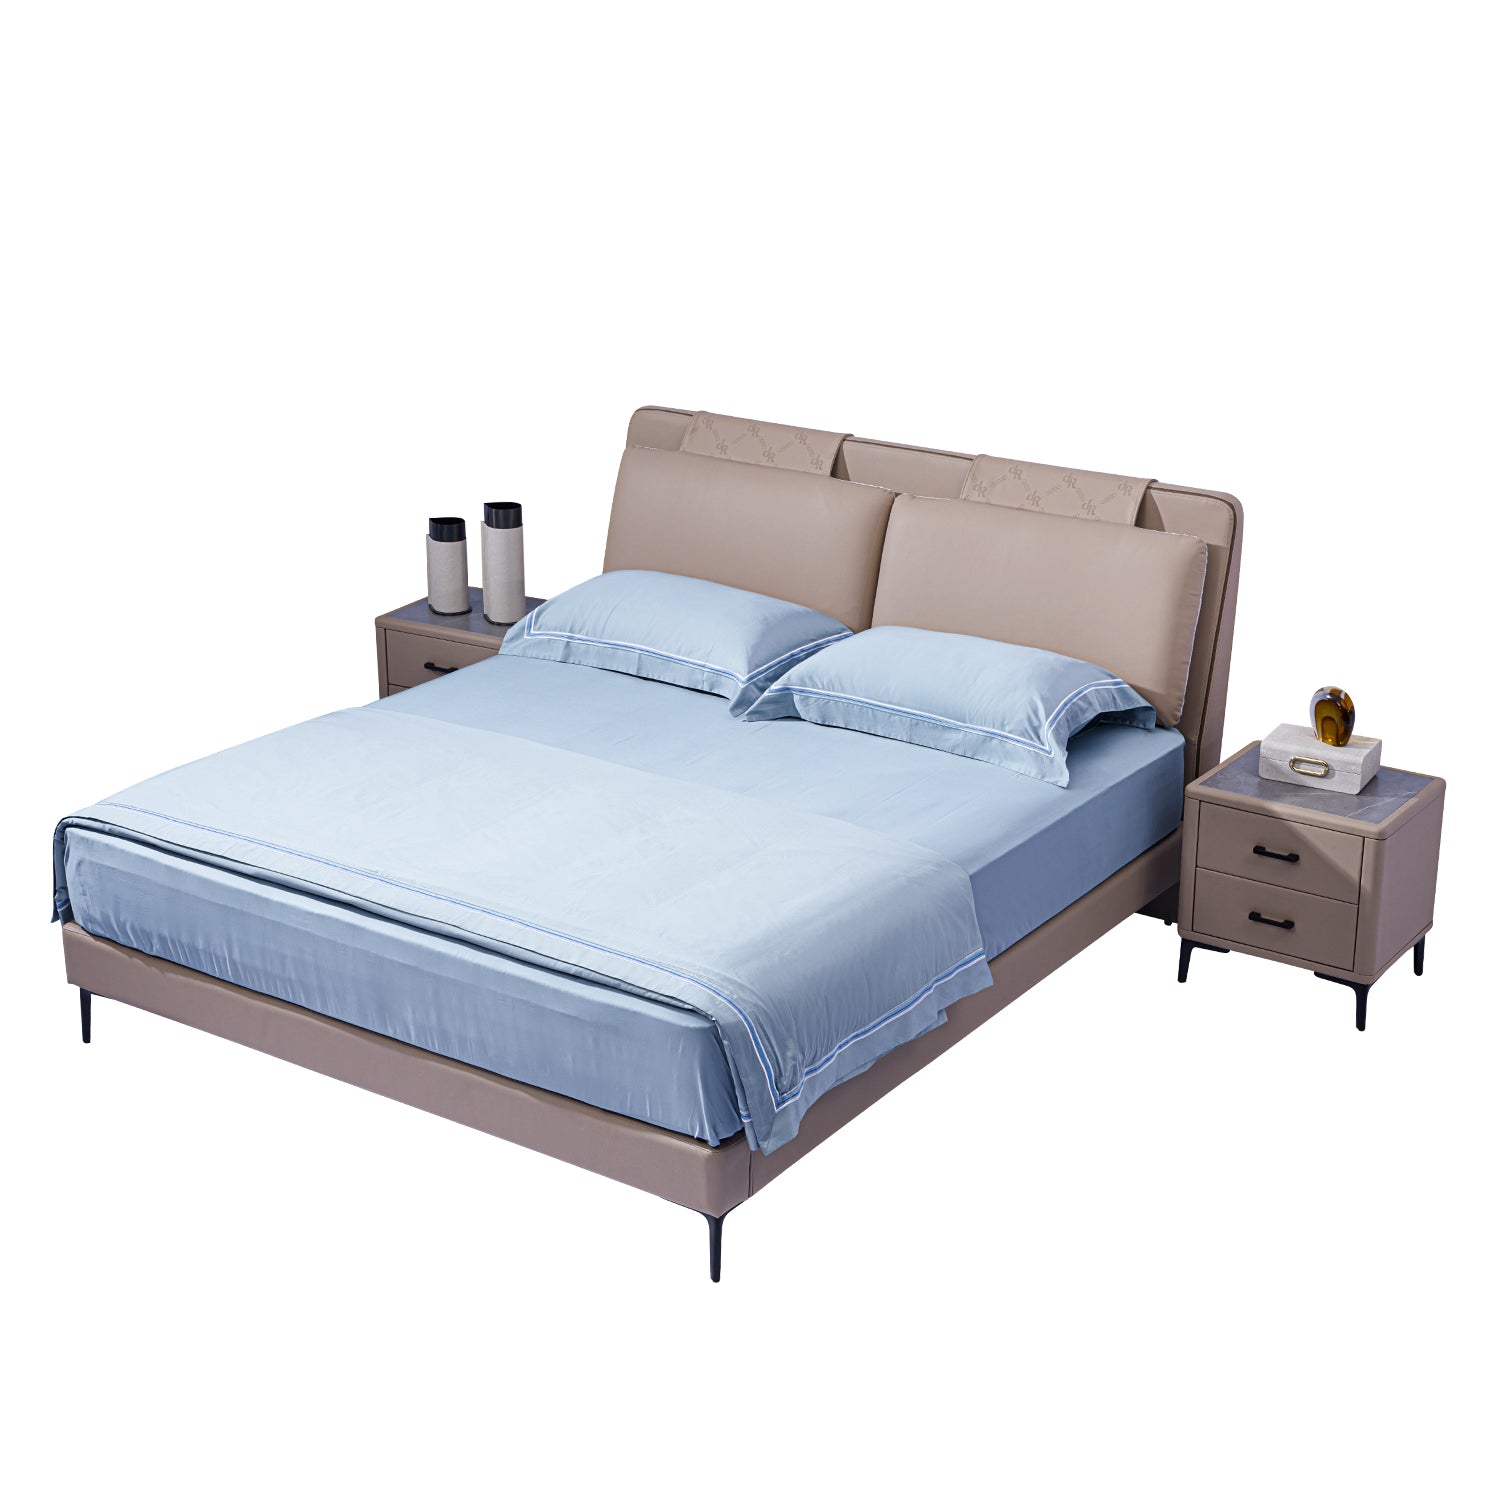 Modern taupe-colored bed frame with cushioned headboard and light blue bedding, flanked by matching bedside tables with drawers, books, and vases.